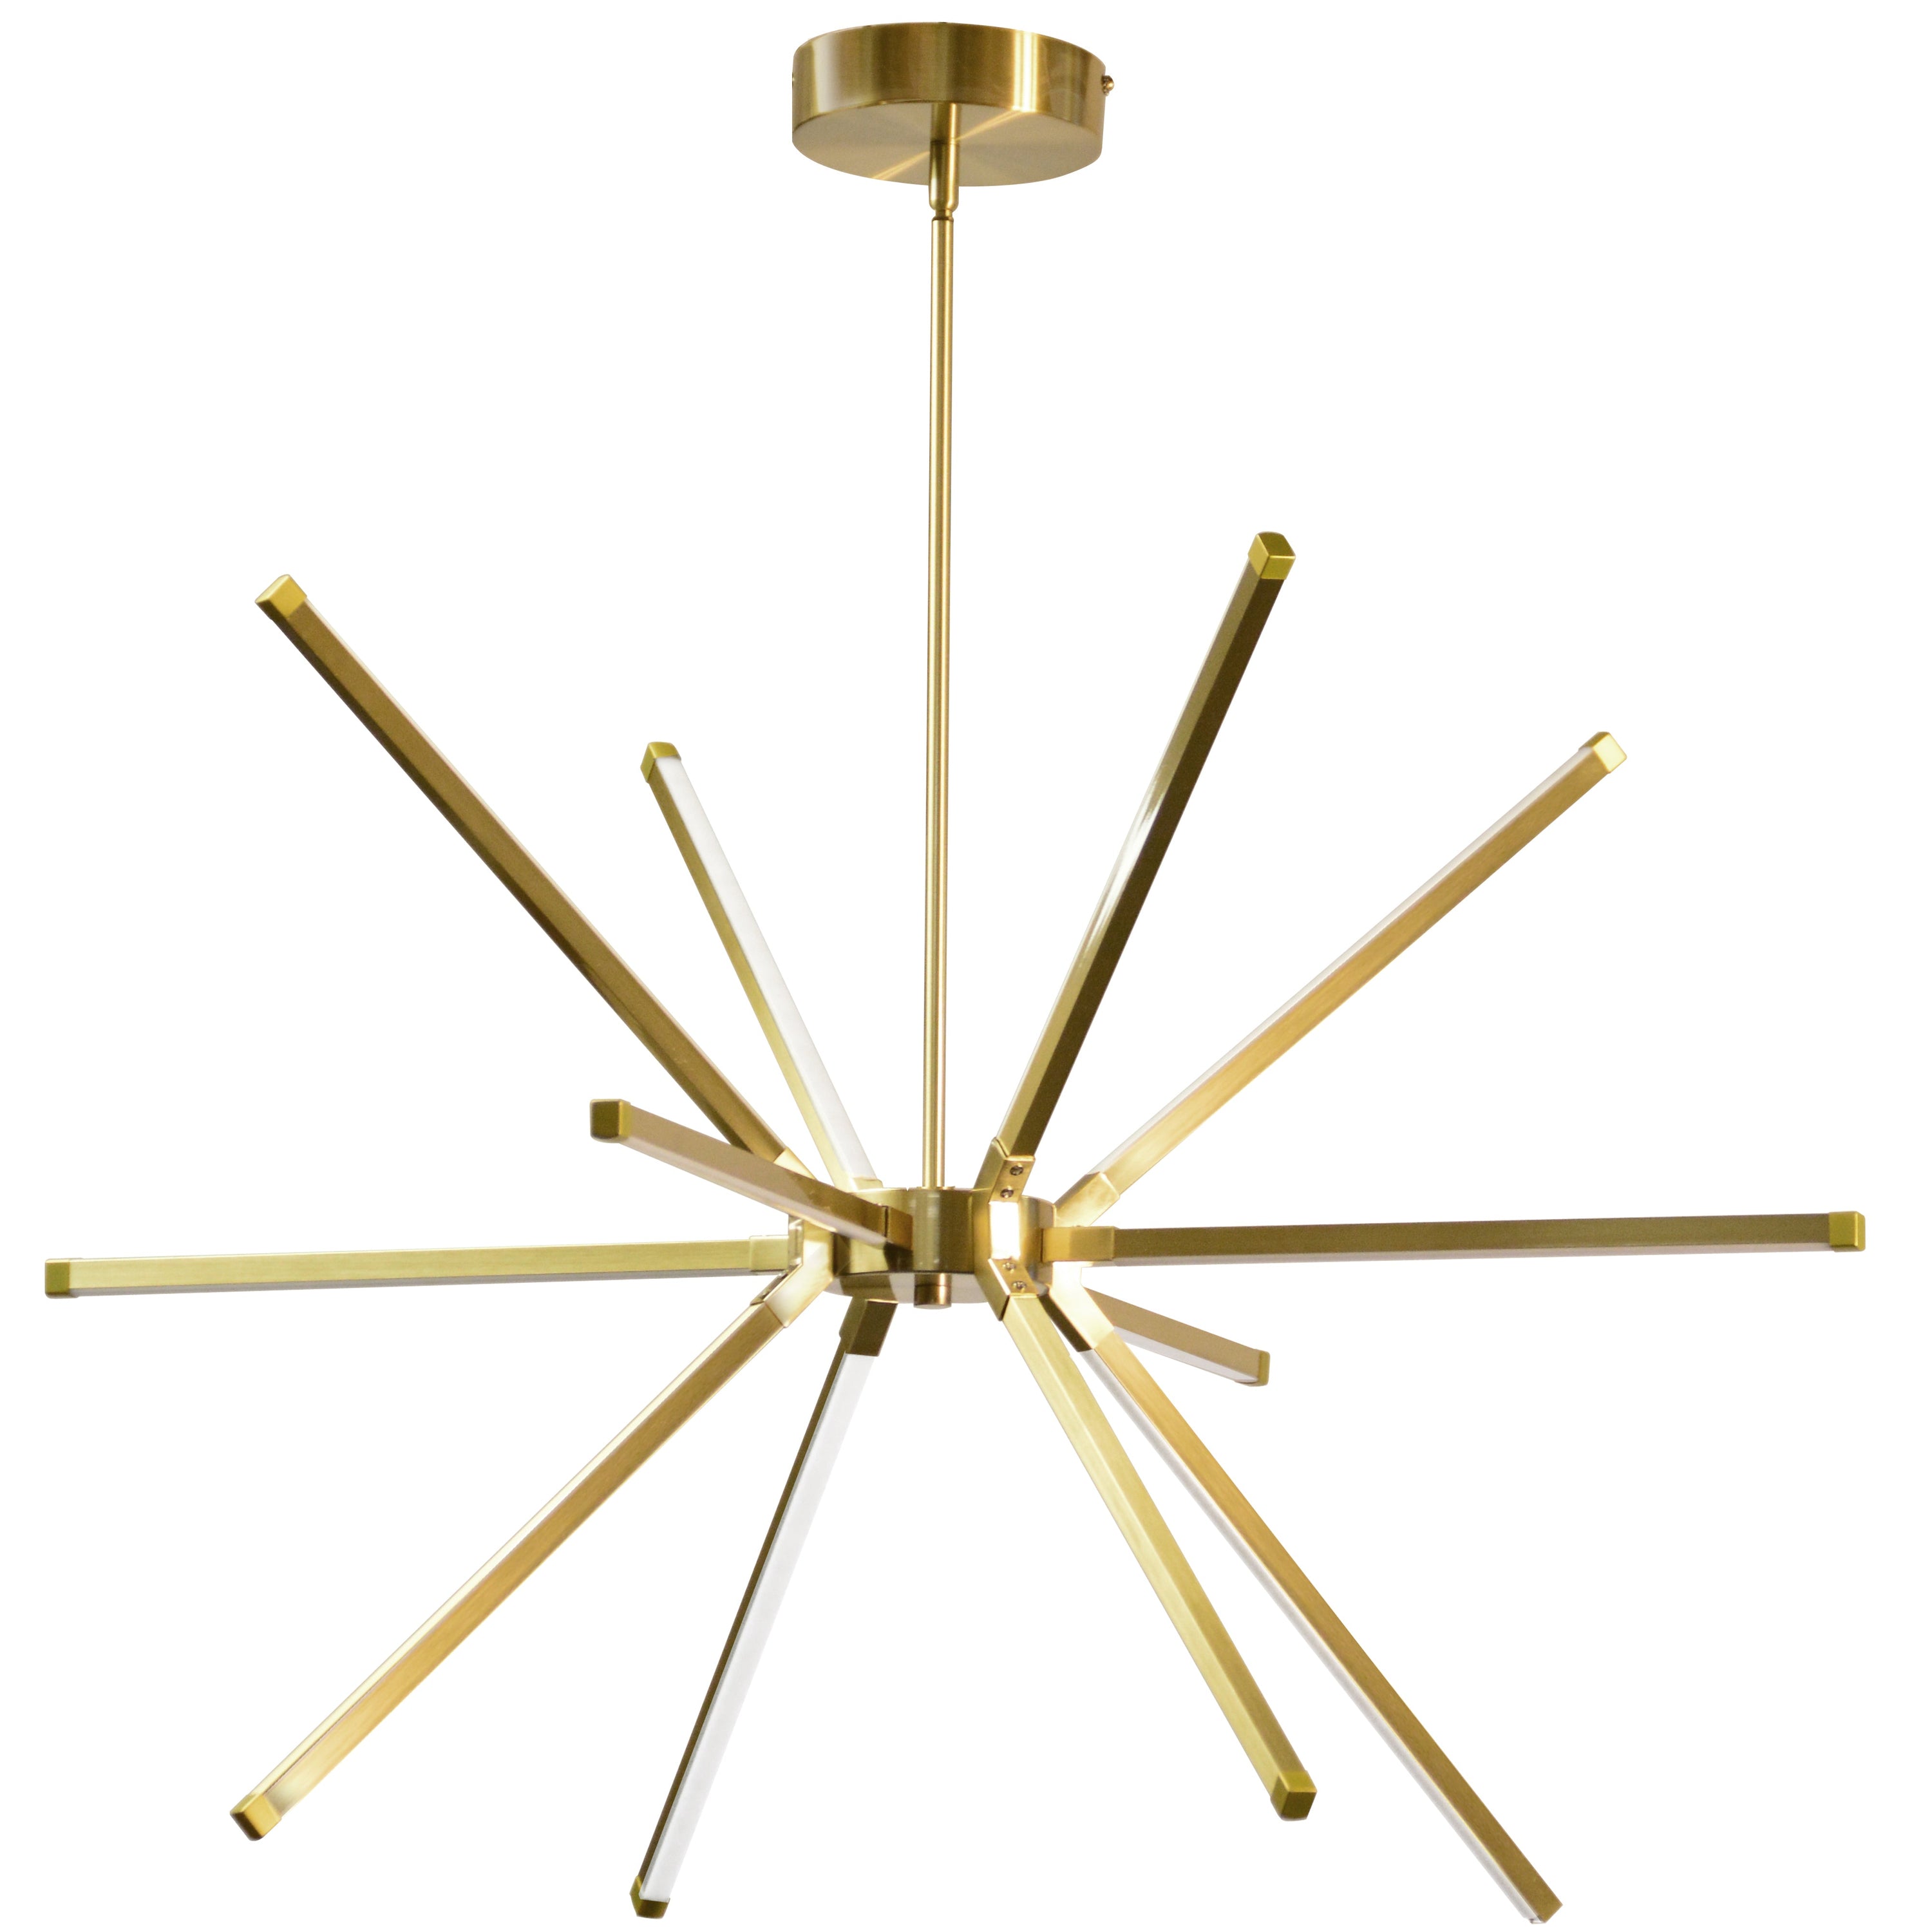 Dainolite Array - ARY-3260LEDC-AGB - 60W LED Chandelier Fixture, Aged Brass with White Acrylic Diffuser - Aged Brass